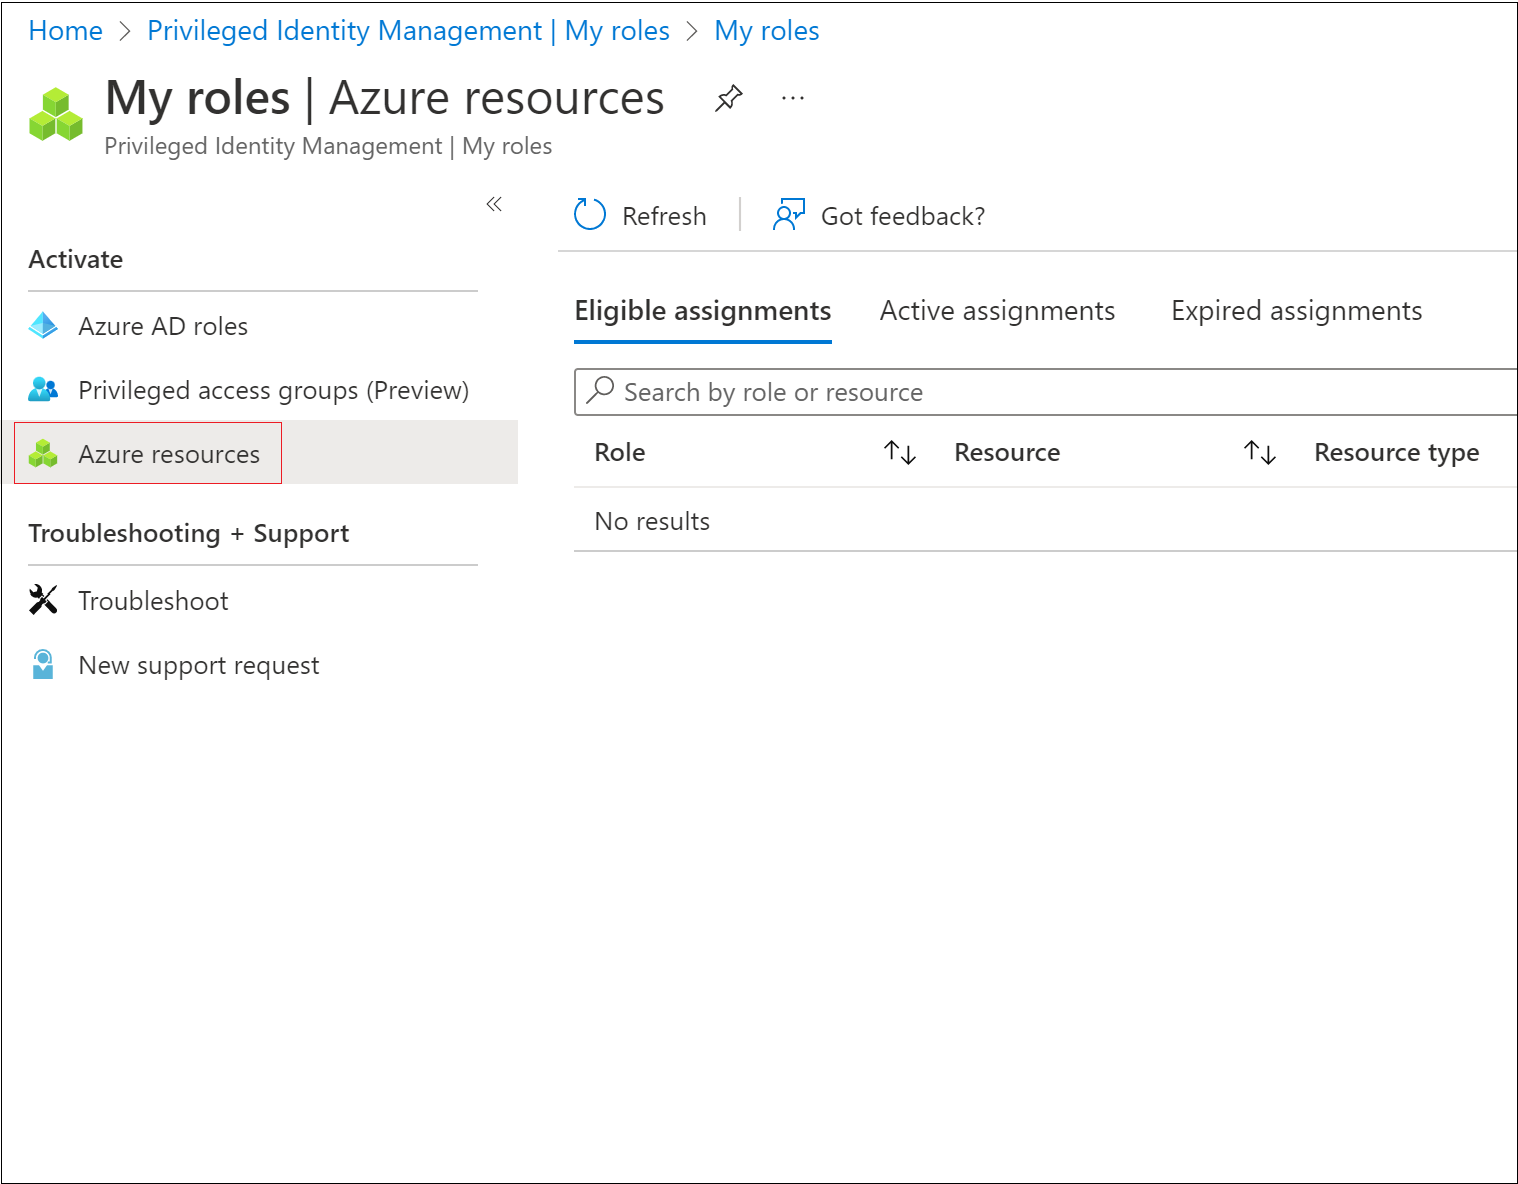 My roles - Azure resource roles page